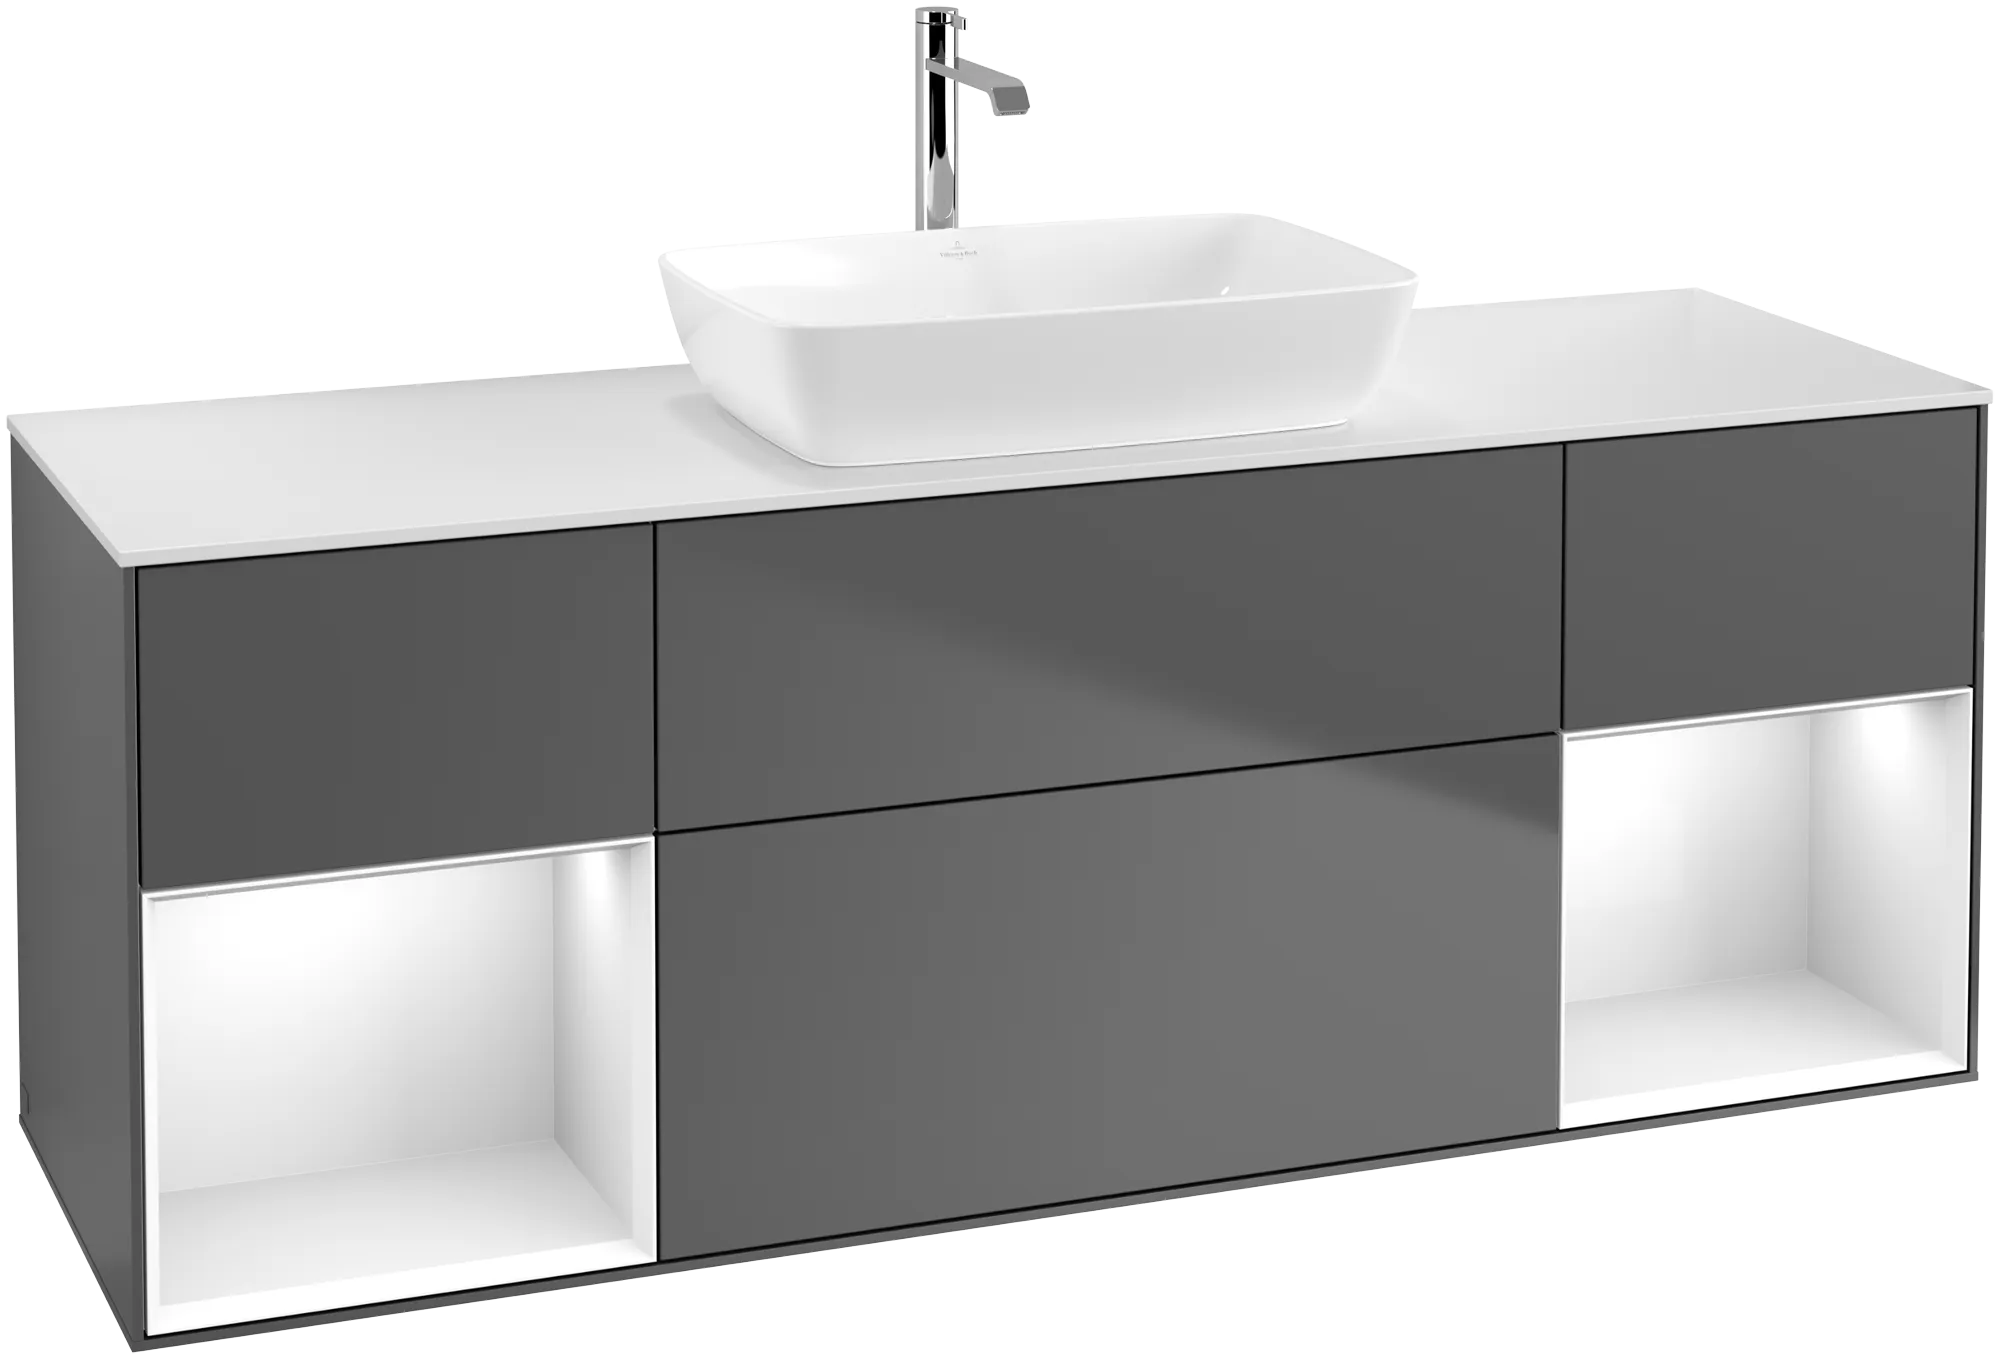 Зображення з  VILLEROY BOCH Finion Vanity unit, with lighting, 4 pull-out compartments, 1600 x 603 x 501 mm, Anthracite Matt Lacquer / Glossy White Lacquer / Glass White Matt #G861GFGK